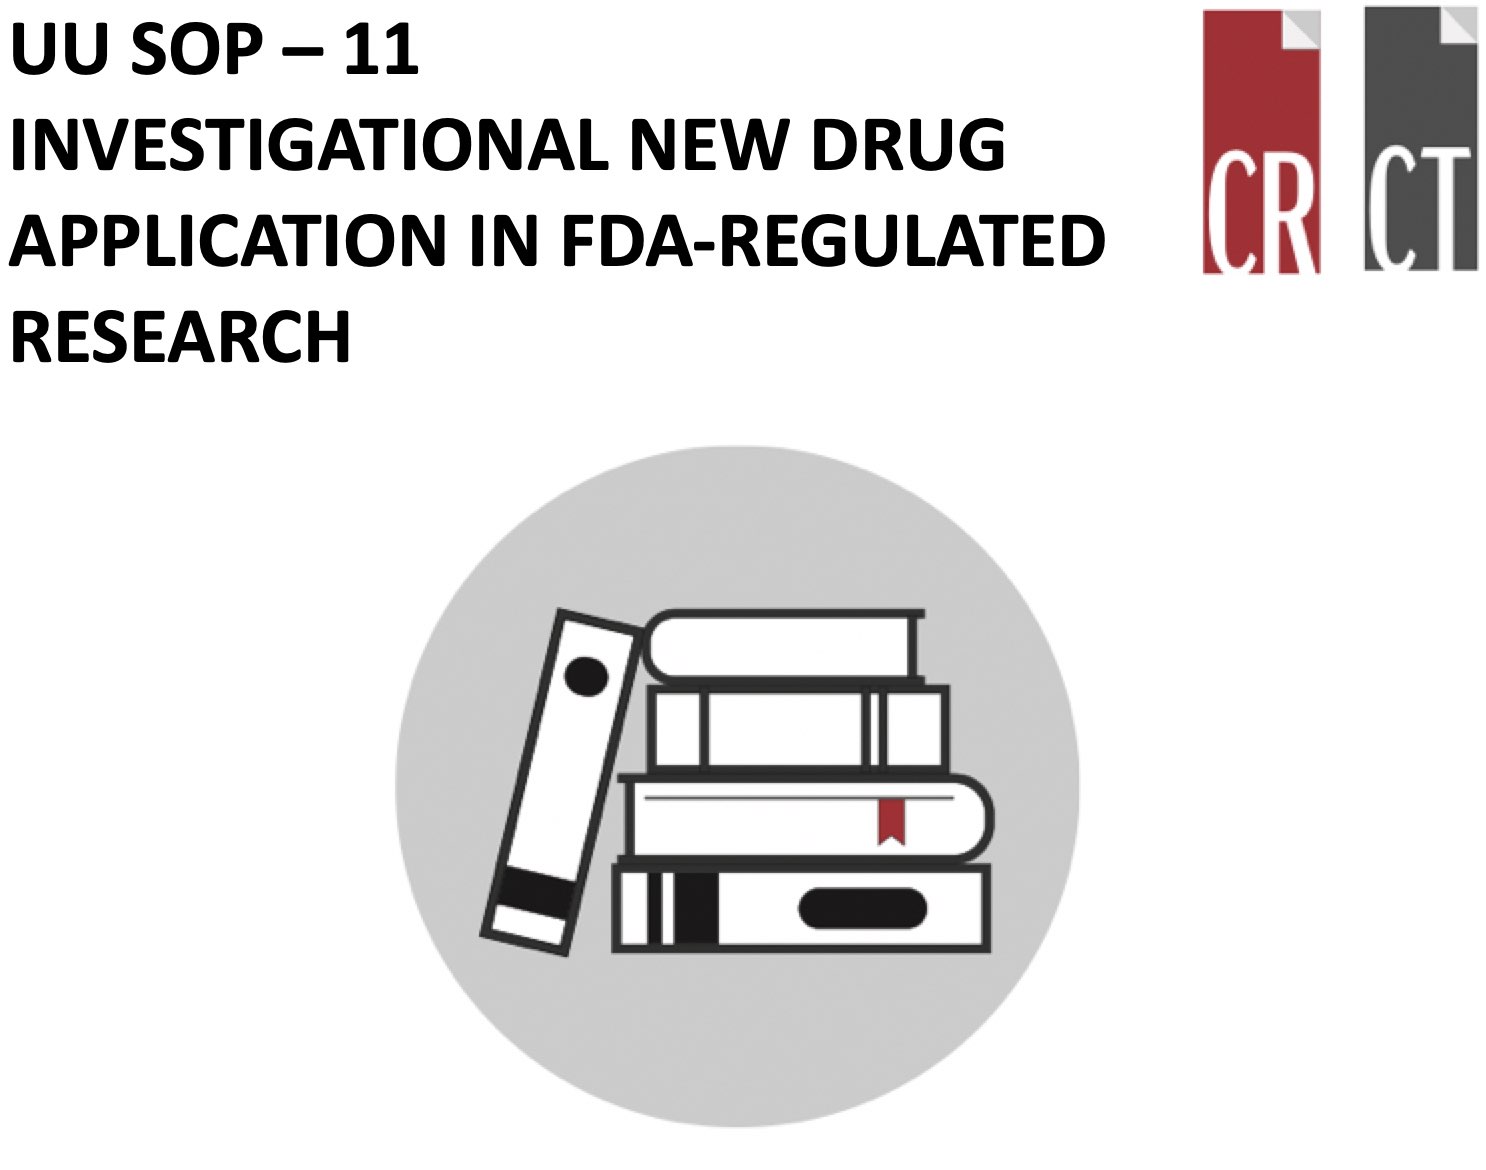 UUSOP 11 Investigational New Drug Application in FDA-Regulated Research